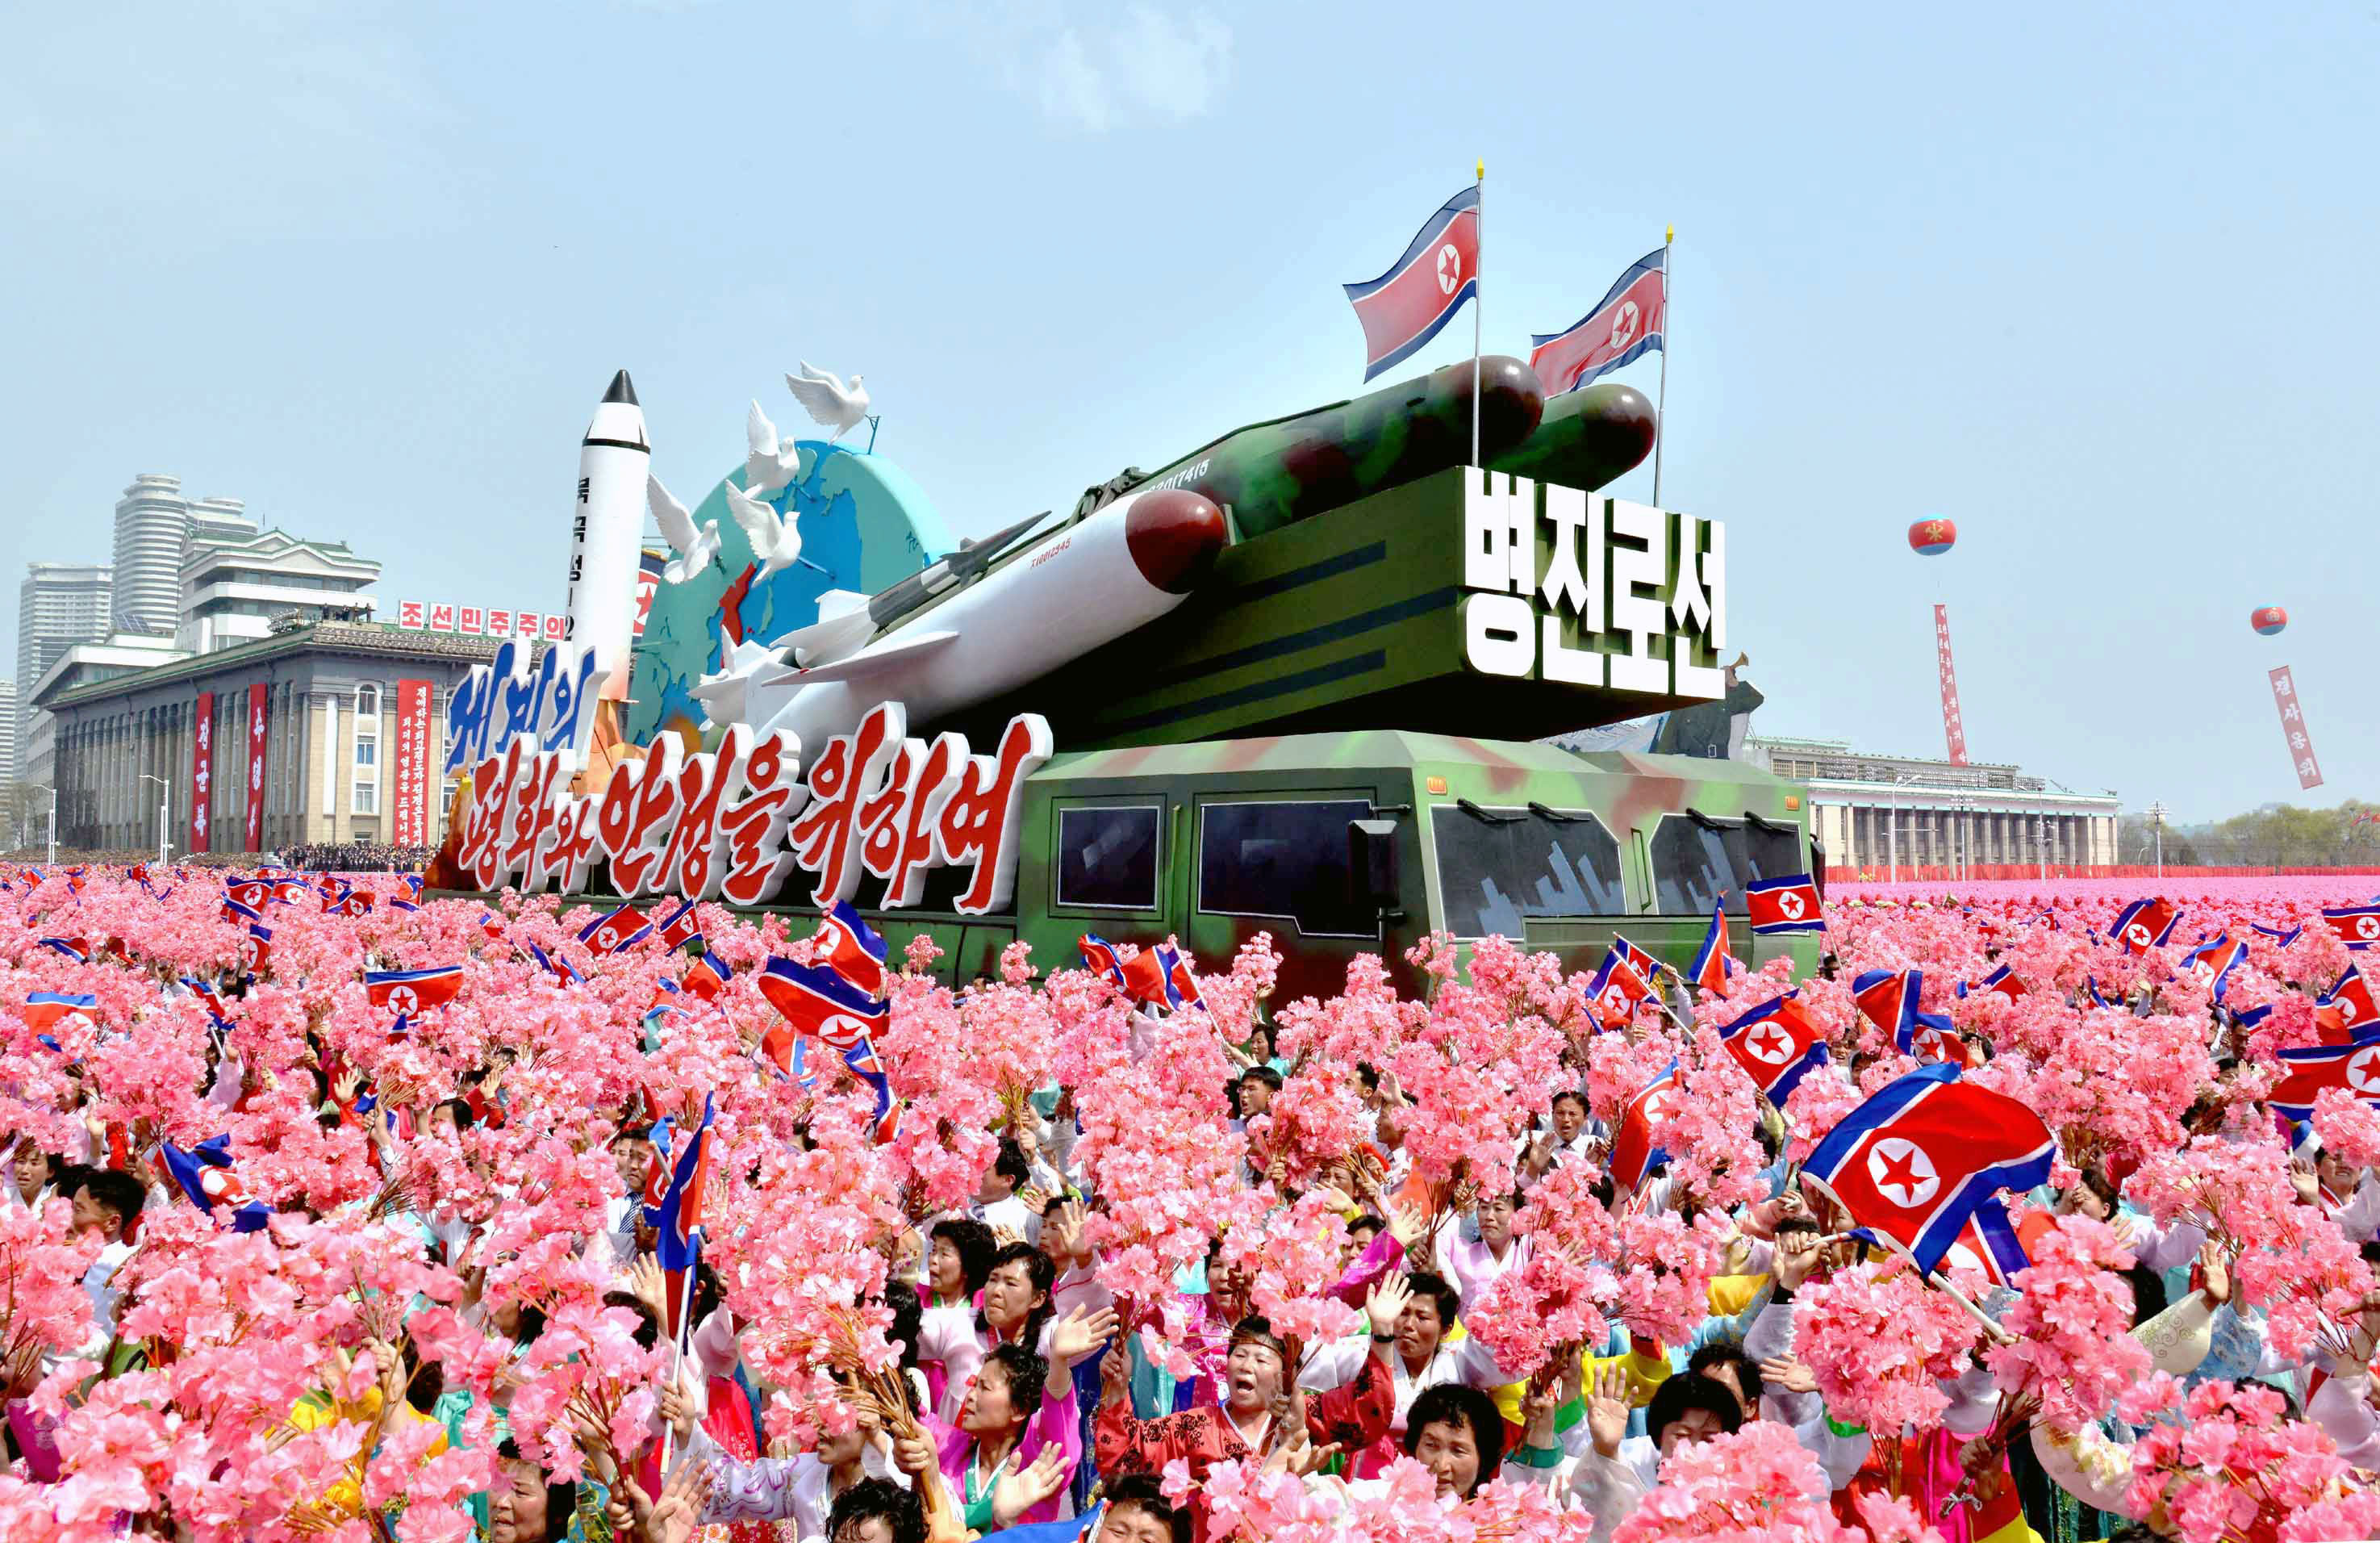 North Korea holds a military parade at Kim Il Sung Square in Pyongyang on April 15, 2017, as it marked the 105th anniversary of its founding leader's birth. (Kyodo)
==Kyodo